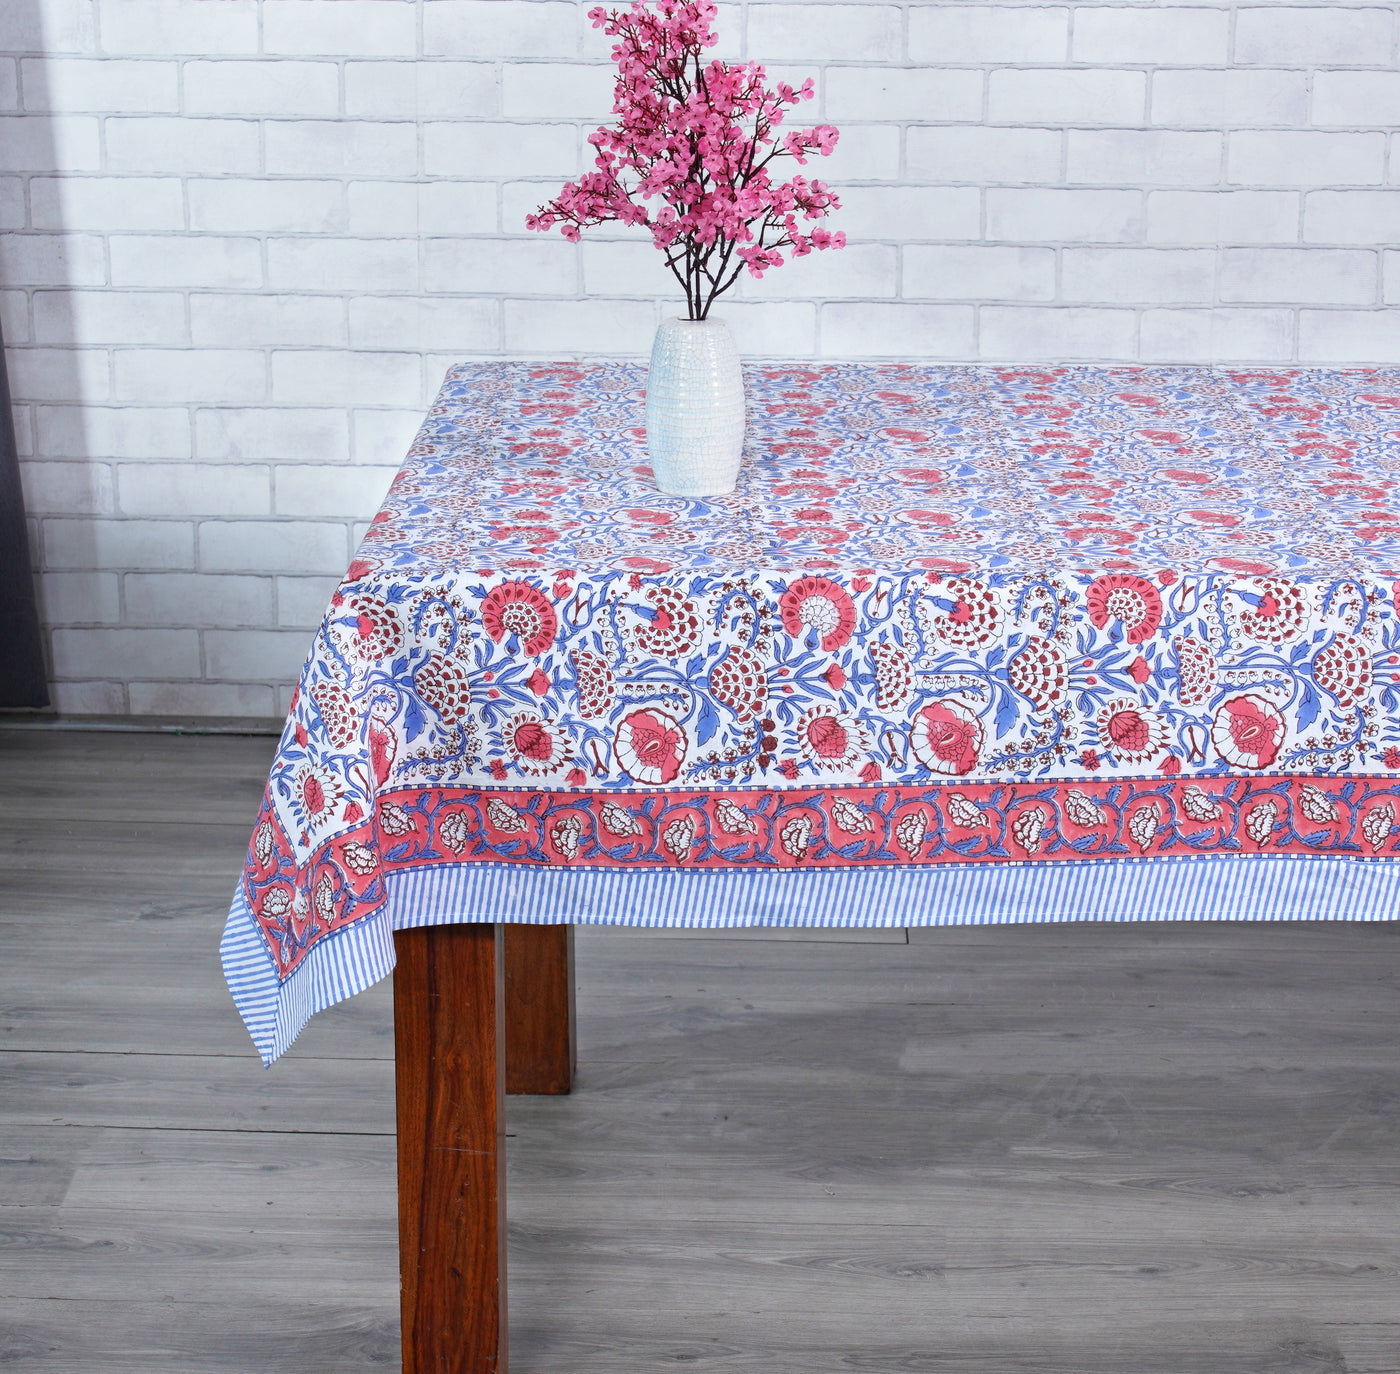 Fabricrush Pigeon Blue and flamingo pink on white Flower Design Hand Block Print Tablecloth Table Cover And Linen Set Gift For Mom and Gift For Her